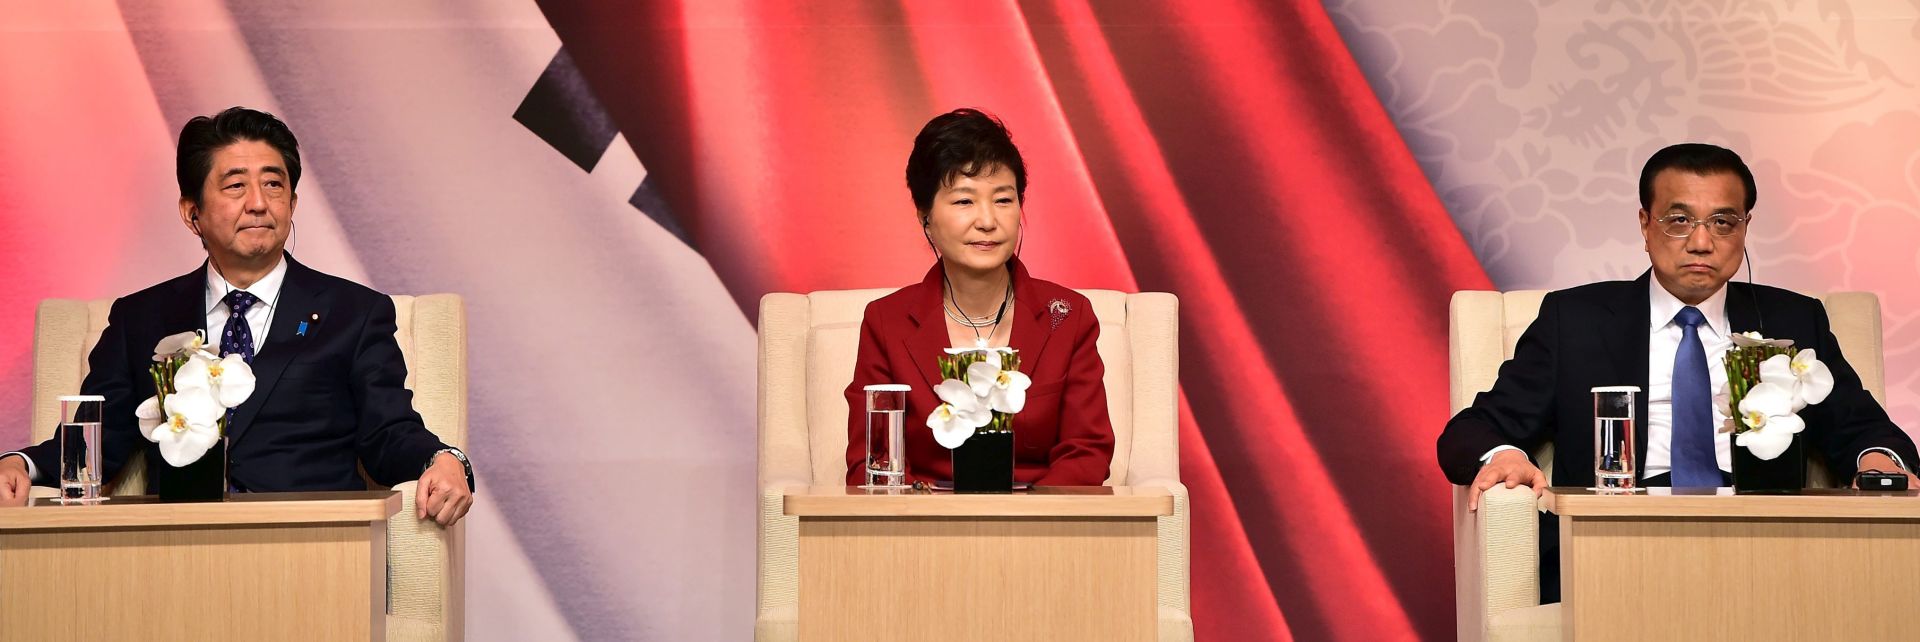 epa05005794 South Korean President Park Geun-Hye (C), Japanese Prime Minister Shinzo Abe (L) and Chinese Premier Li Keqiang (R) attend at a business summit in Seoul, South Korea, 01 November 2015. The leaders of South Korea, China and Japan held their first summit in more than three years on November 1, setting aside historical animosities and territorial disputes to focus on shared security and trade concerns.  EPA/JUNG YEON-JE / POOL